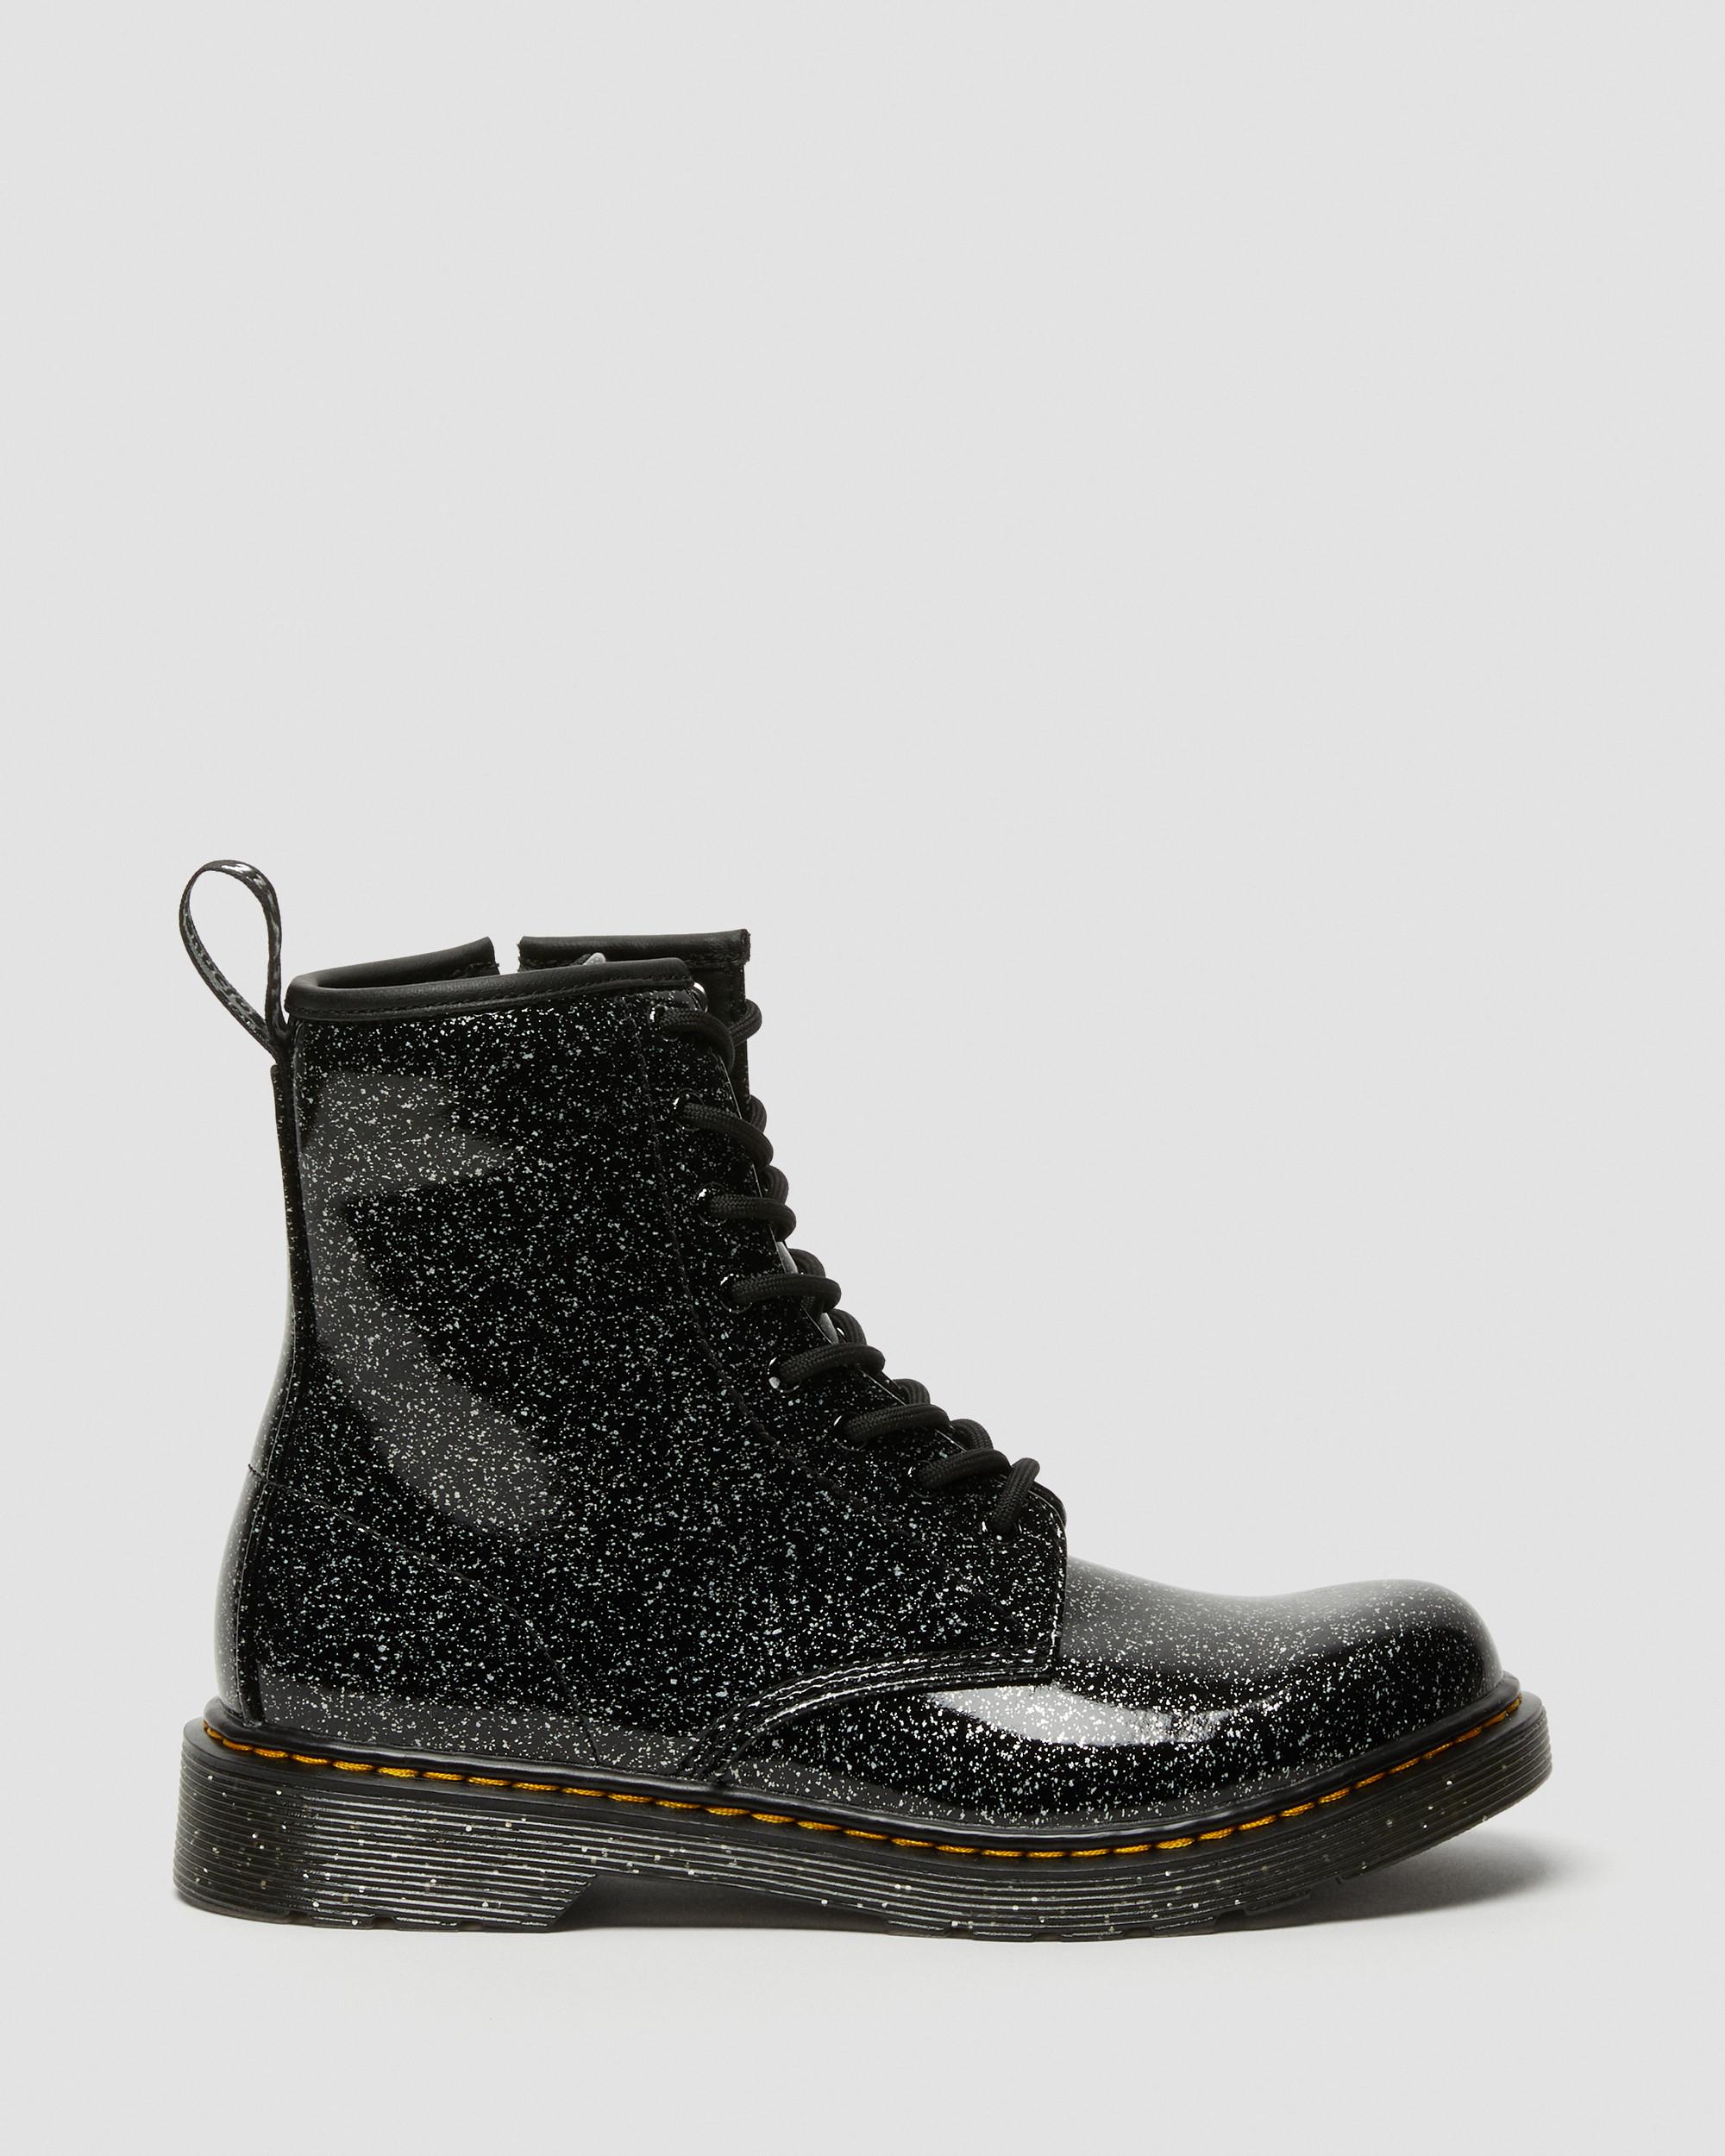 Youth 1460 Glitter Lace Up bootsYouth 1460 Glitter Lace Up Boots Dr. Martens